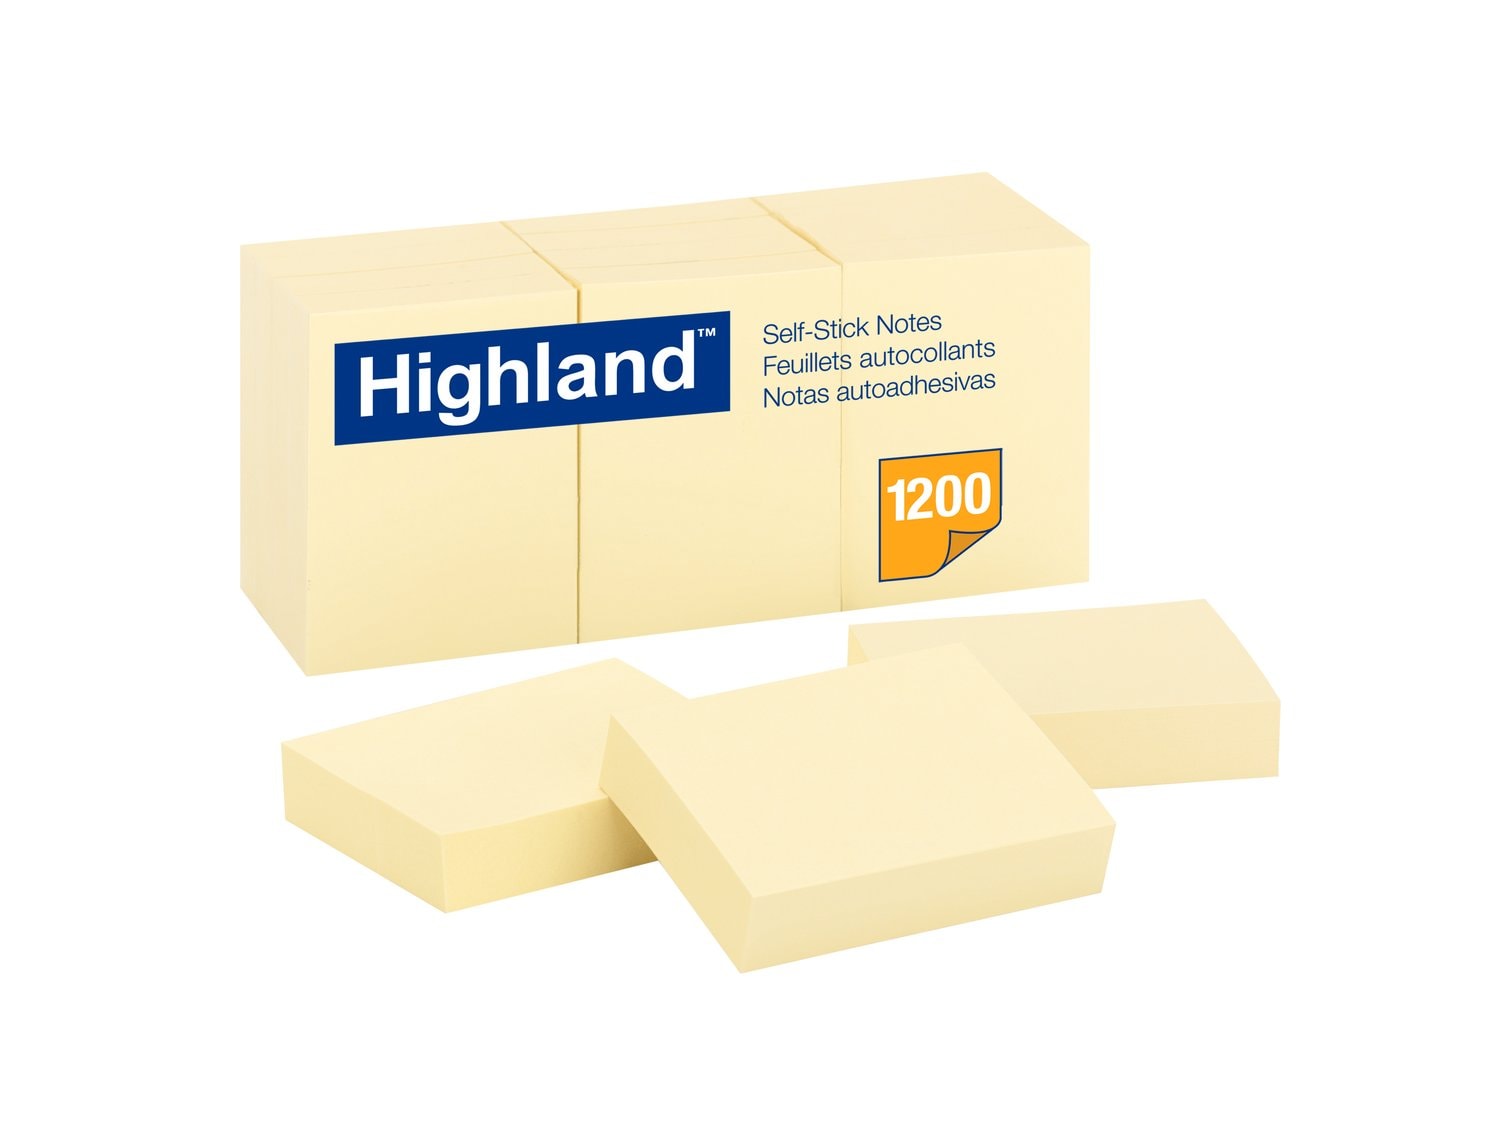 7000050089 - Highland Notes 6539, 1-1/2 in x 2 in (7.62 cm x 7.62 cm) Yellow